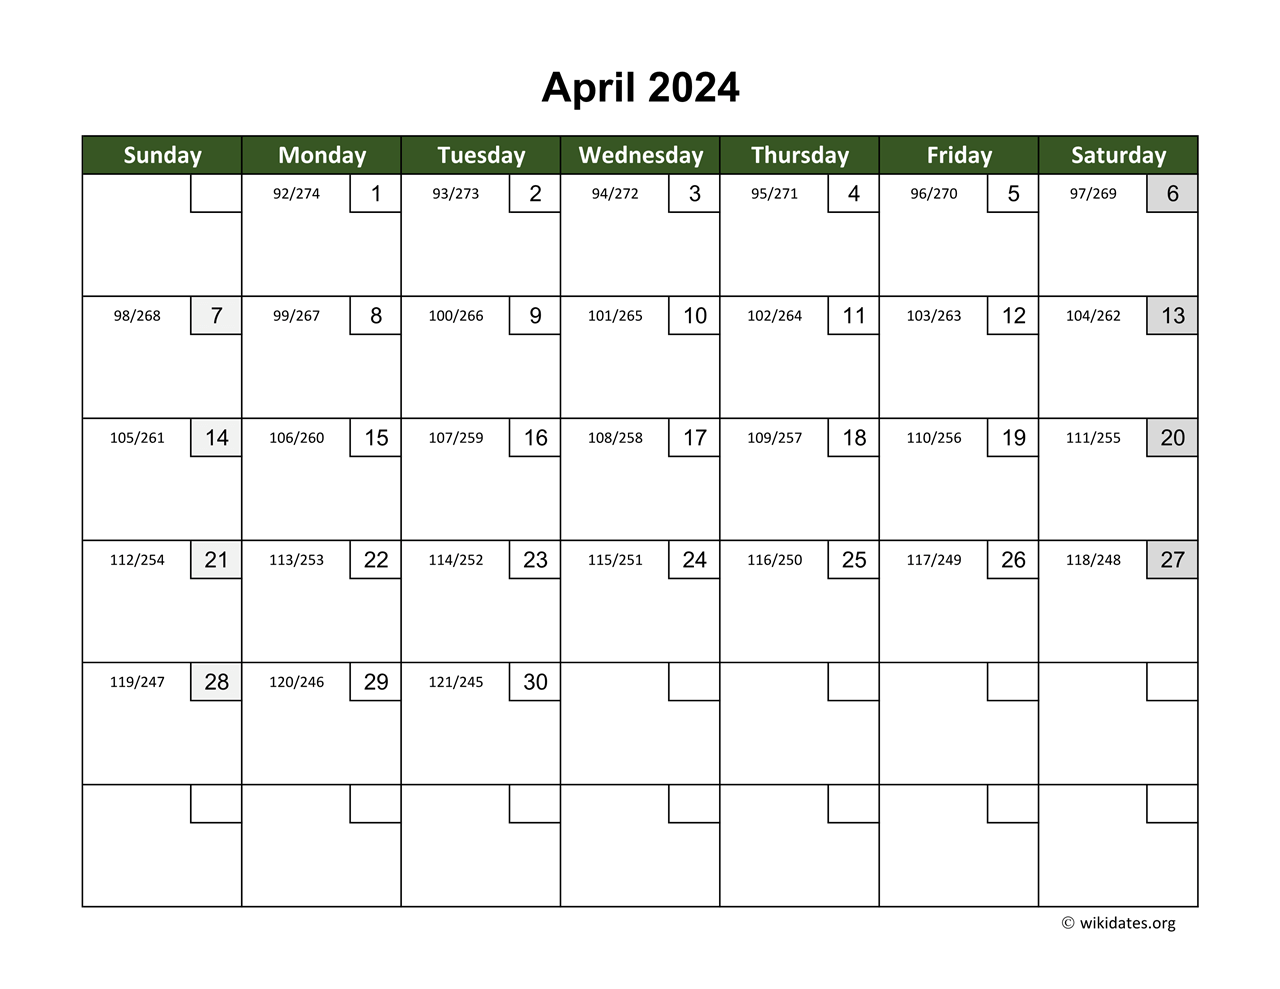 april-2024-calendar-with-day-numbers-wikidates